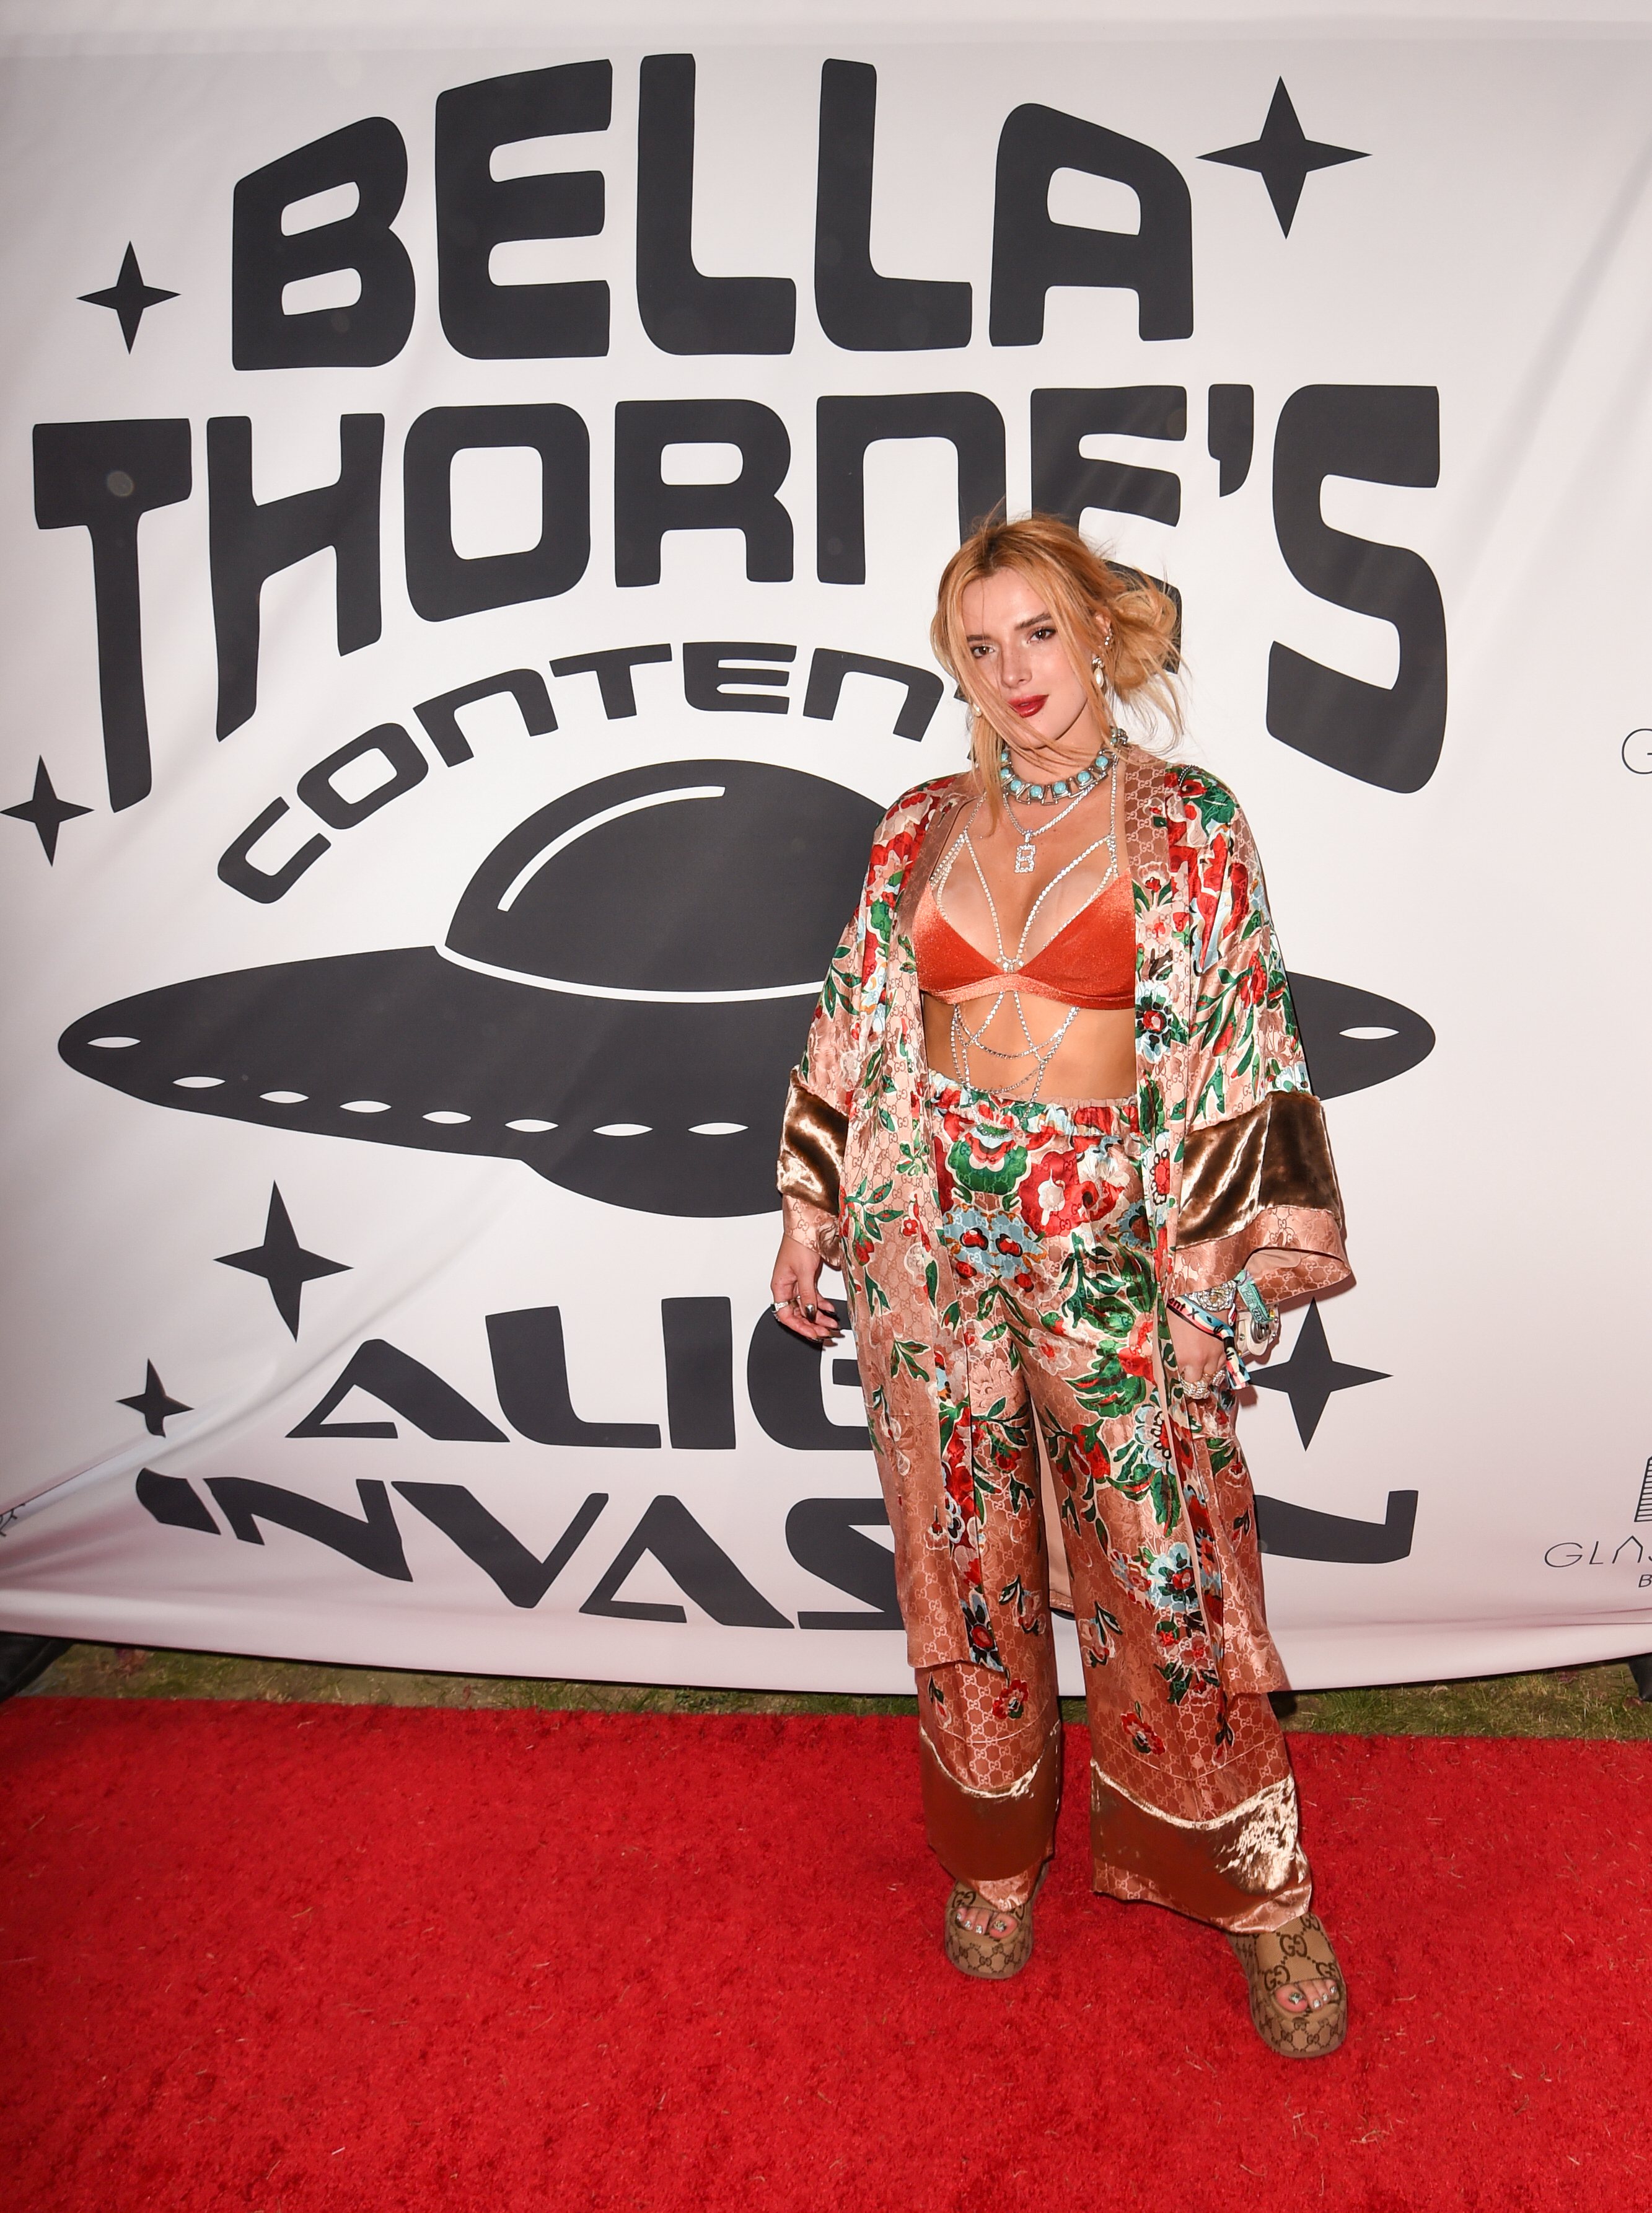 Bella Thorne Hosts &quot;Alien Invasion&quot; Themed Coachella After Party On April 15, 2022 In Coachella Valley, CA